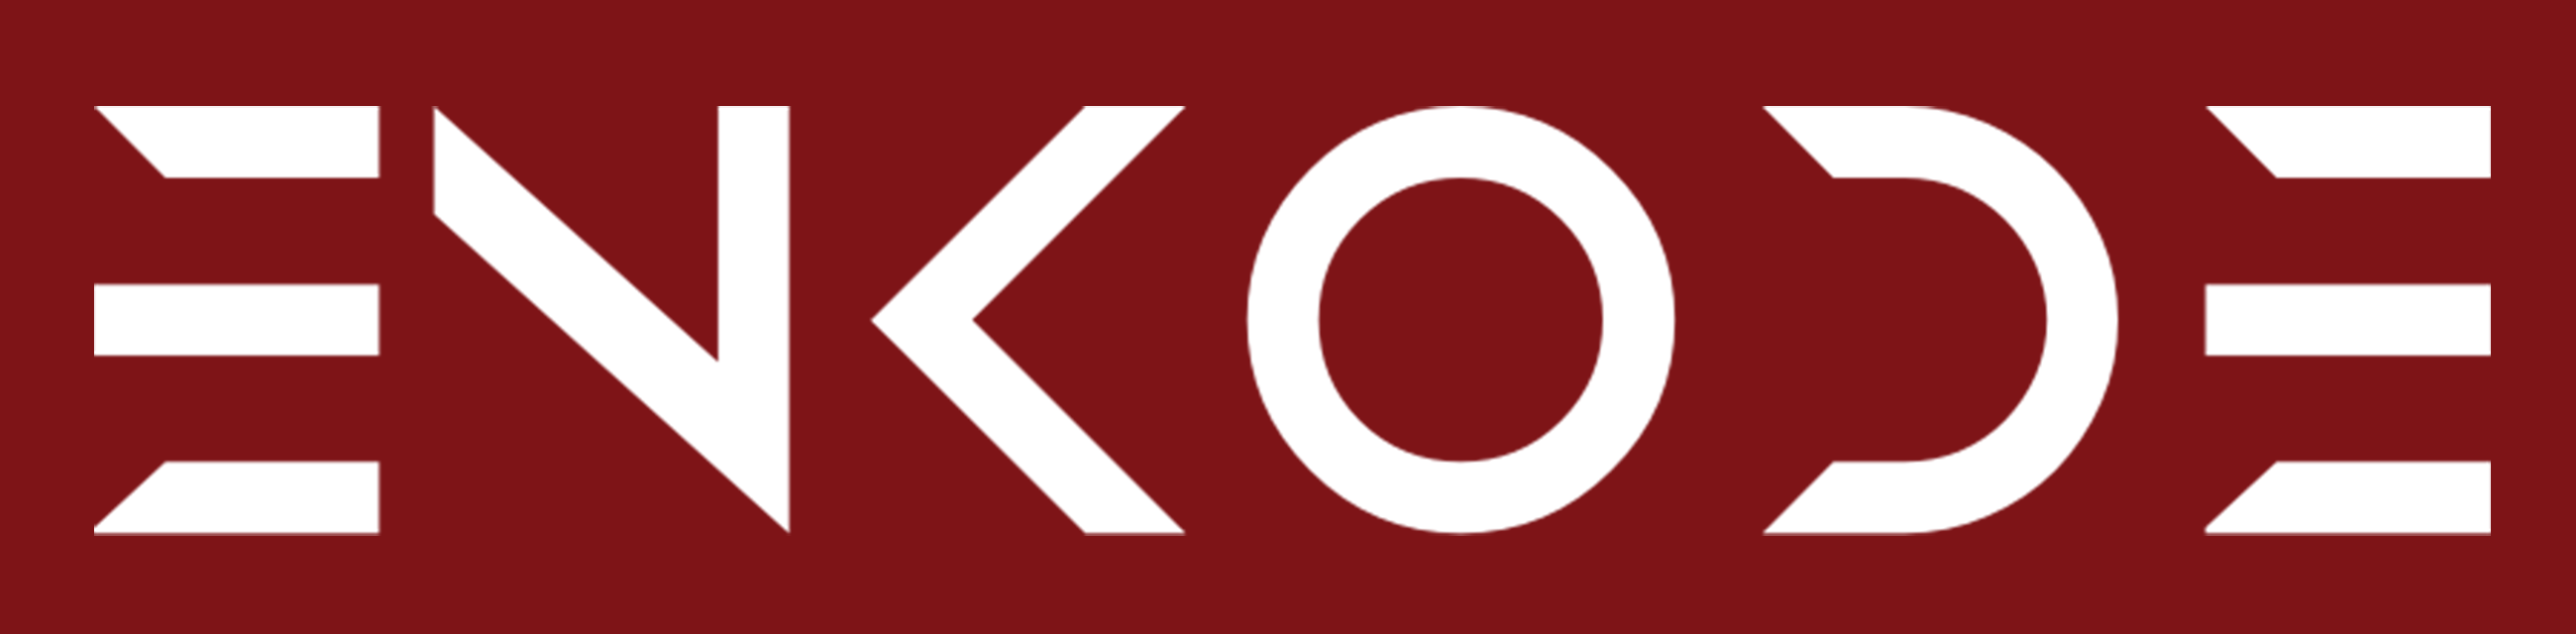 enkode_logo_white_red_background.png